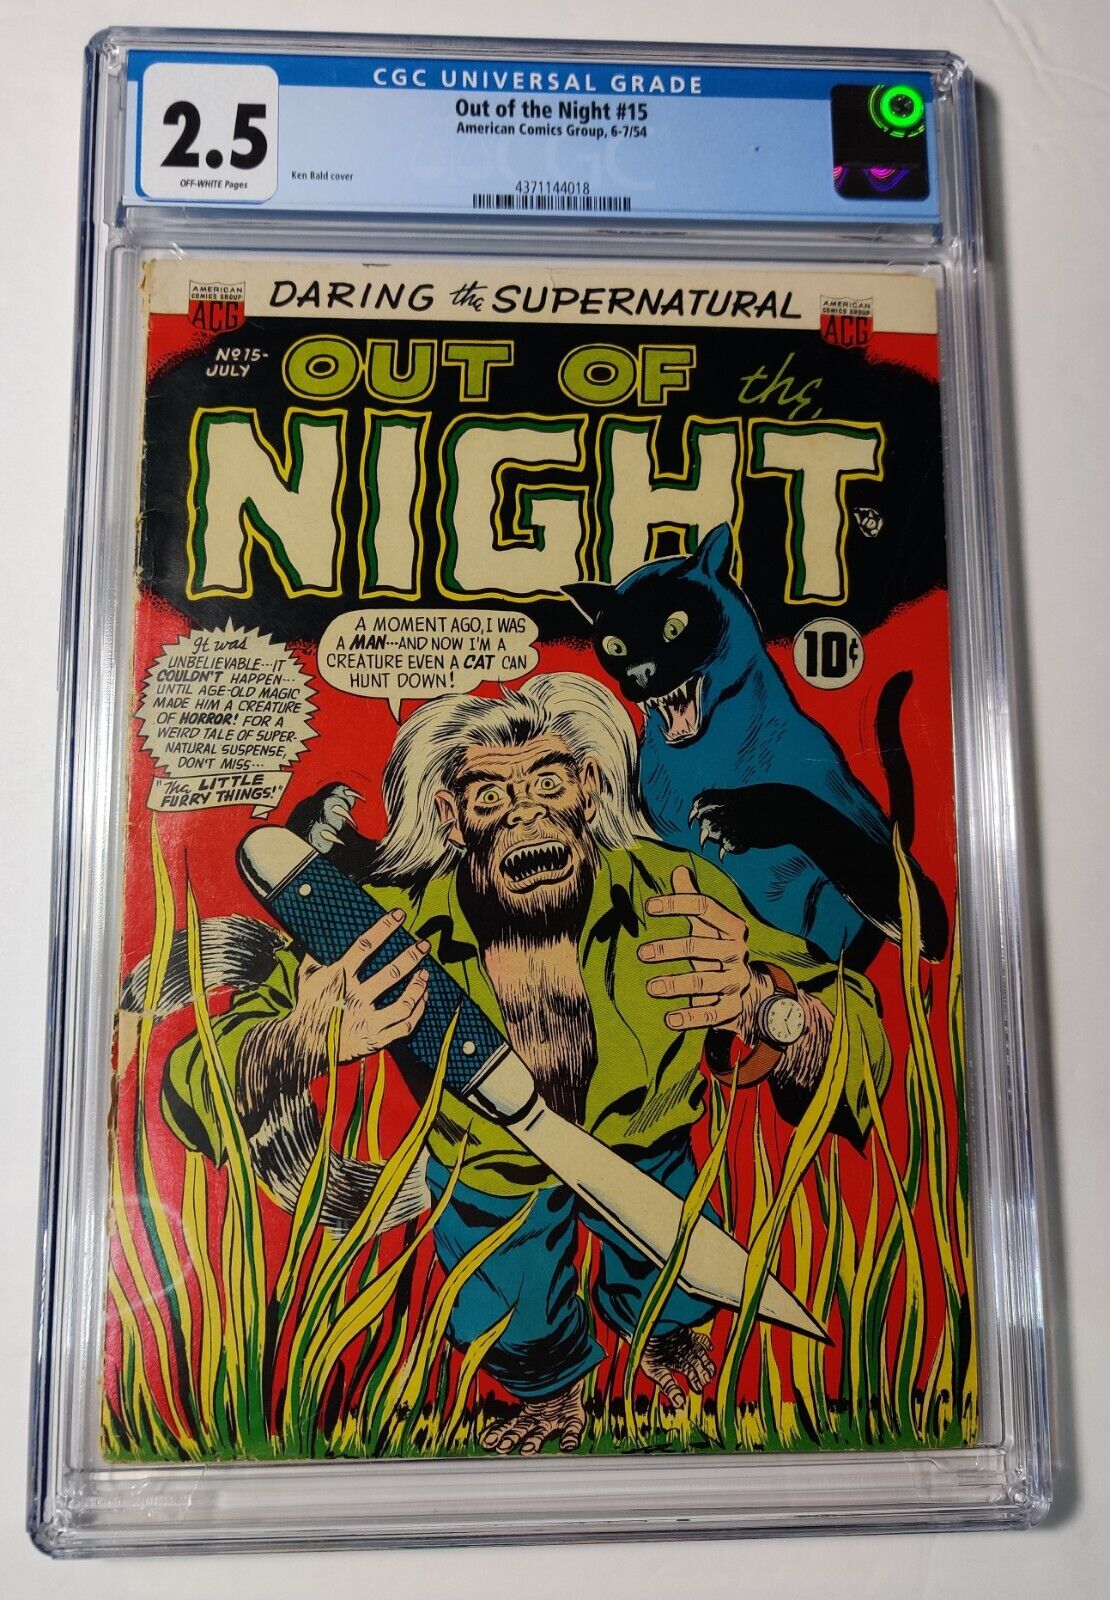 OUT OF THE NIGHT #15 (CGC 2.5) Rare PCH American Comics Group 1954